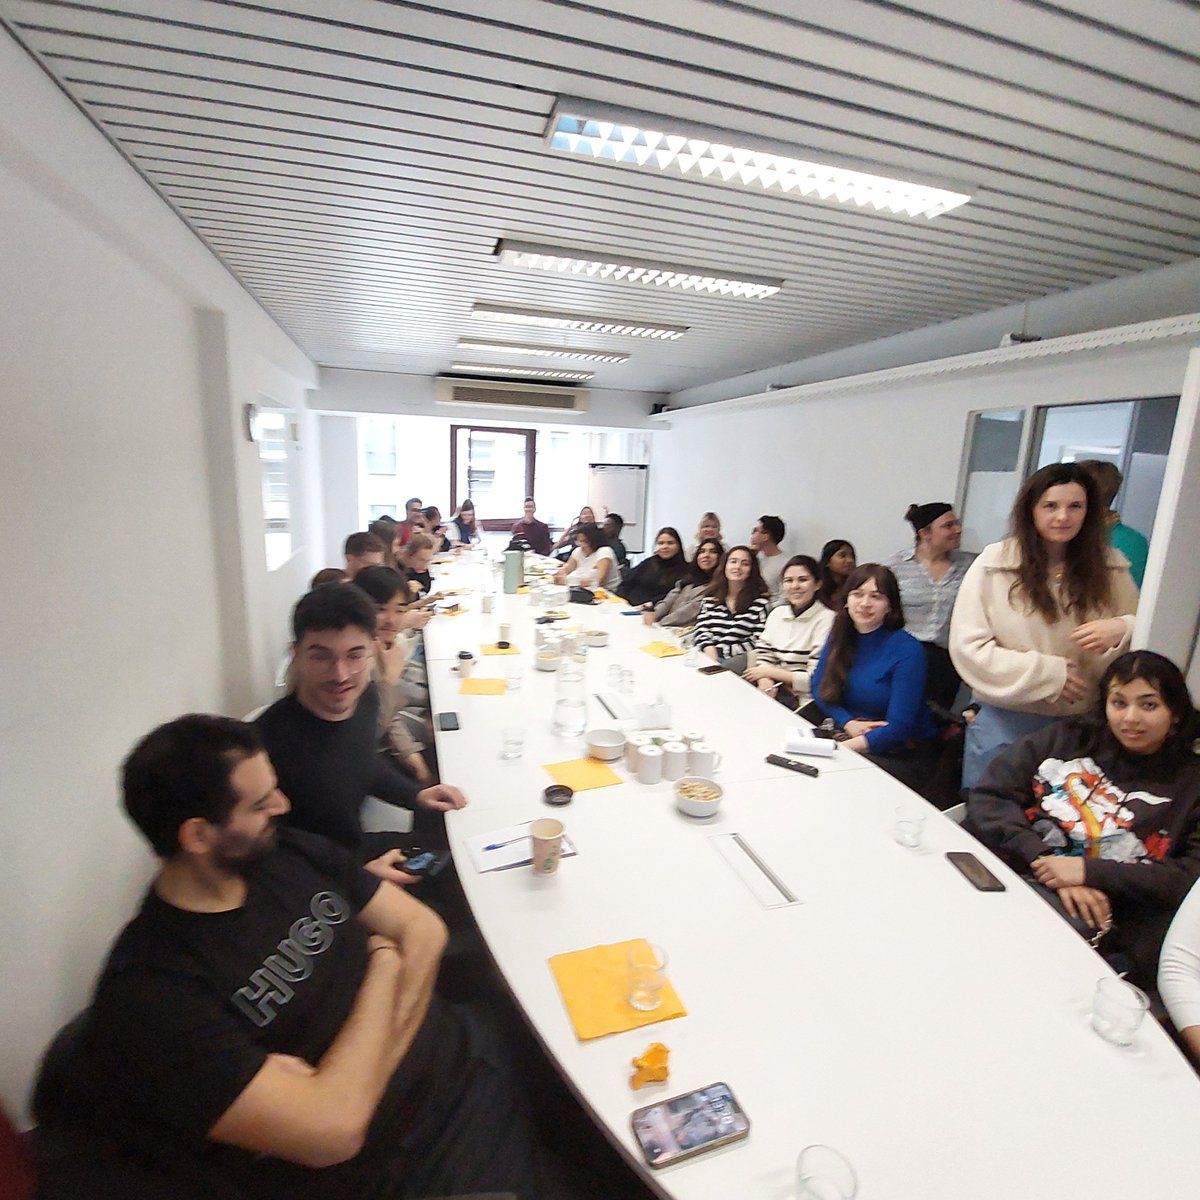 A truly inspiring lunchtime visit by a group of students from the Health Society of the London School of Economics @lsesu 🧑‍🎓 All passionate health advocates, we had a great exchange on all aspects of civil society's role in EU public health with @milkasklvc #standingRoomOnly